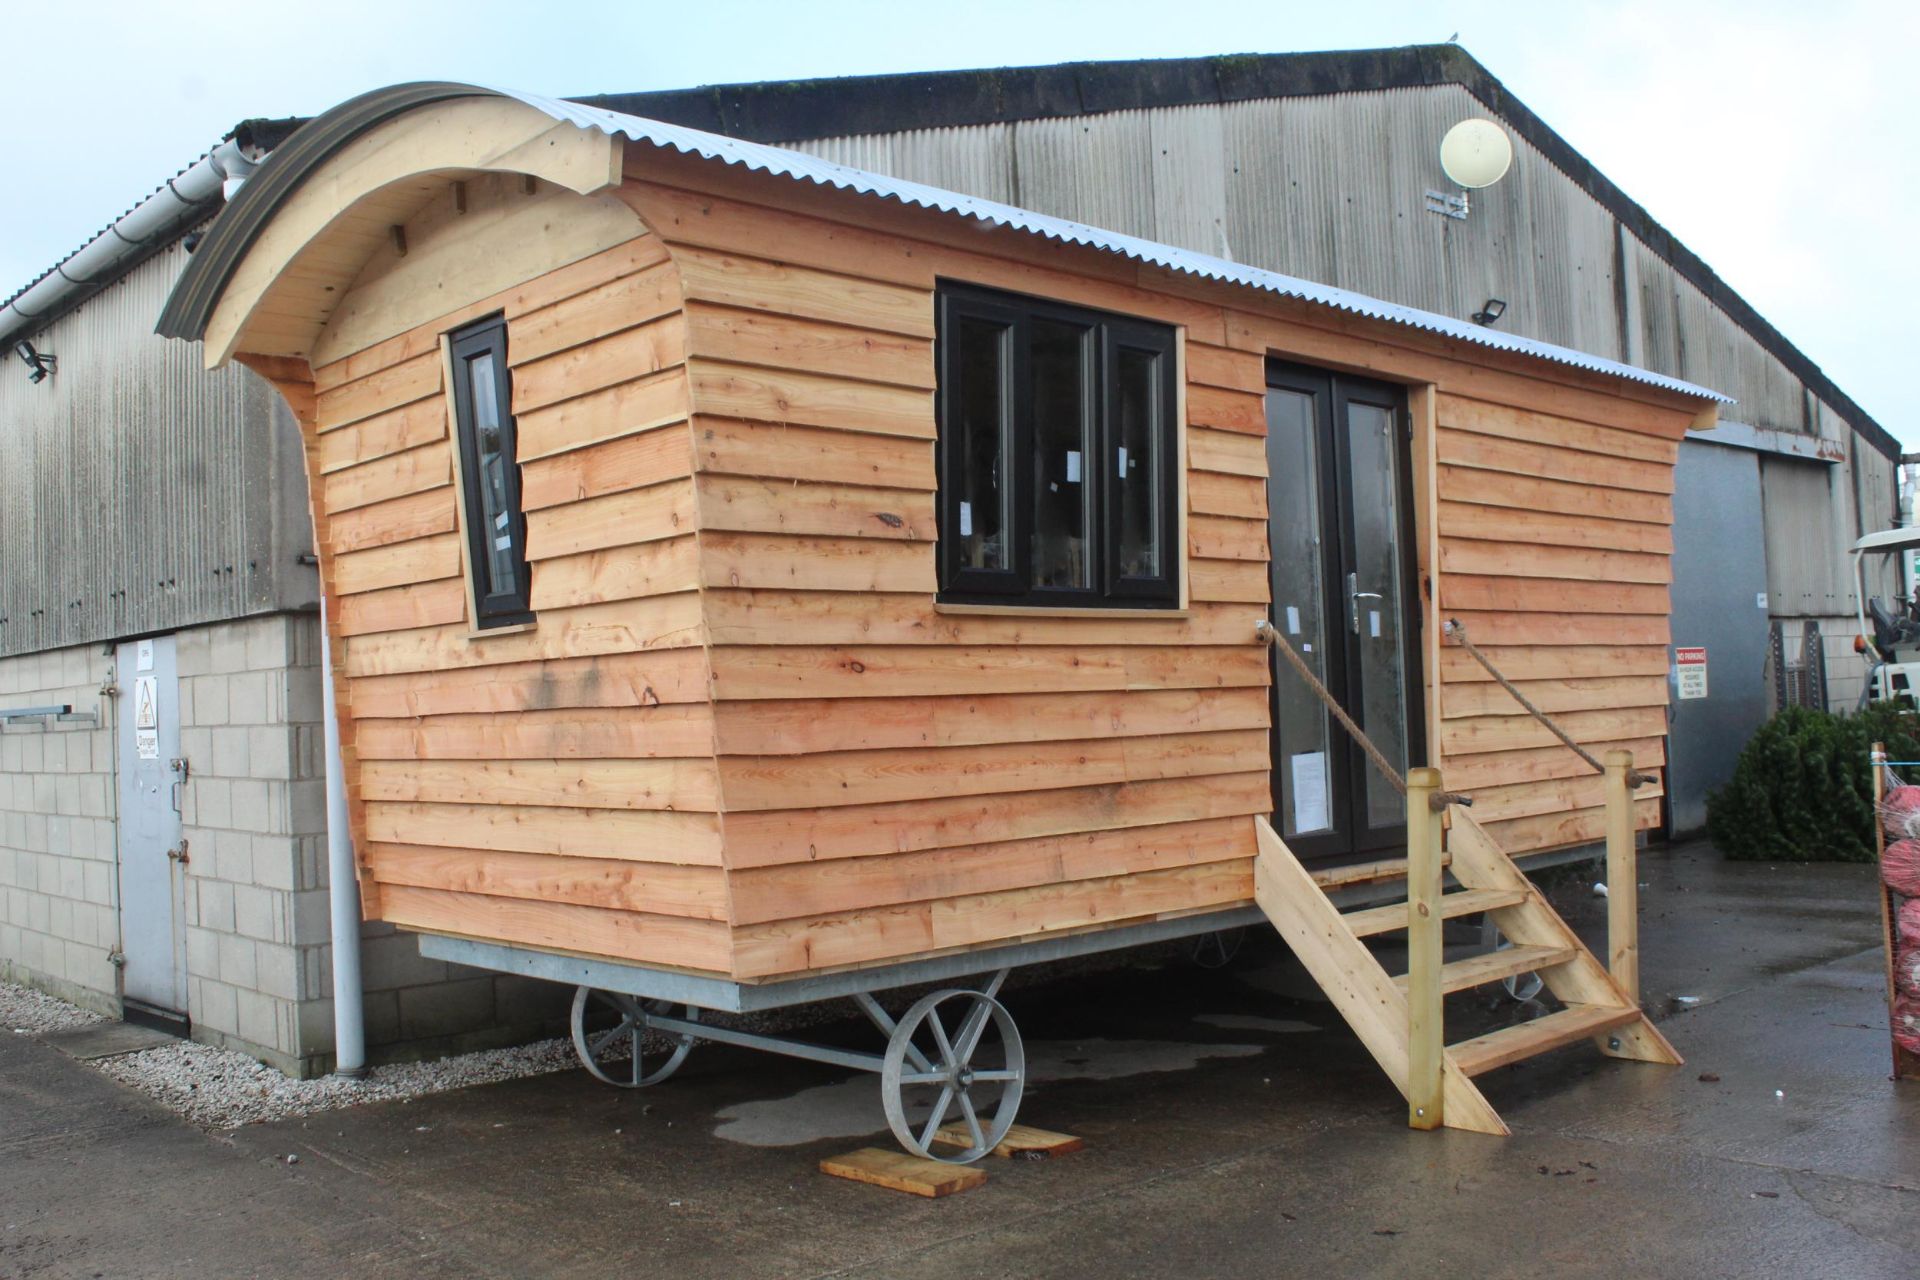 BRAND NEW EXTRA STRONG SHEPHERD HUT "PROVEN DESIGN" 23'6" X 9'6" AT EAVES. 75MM KINGSPAN IN THE